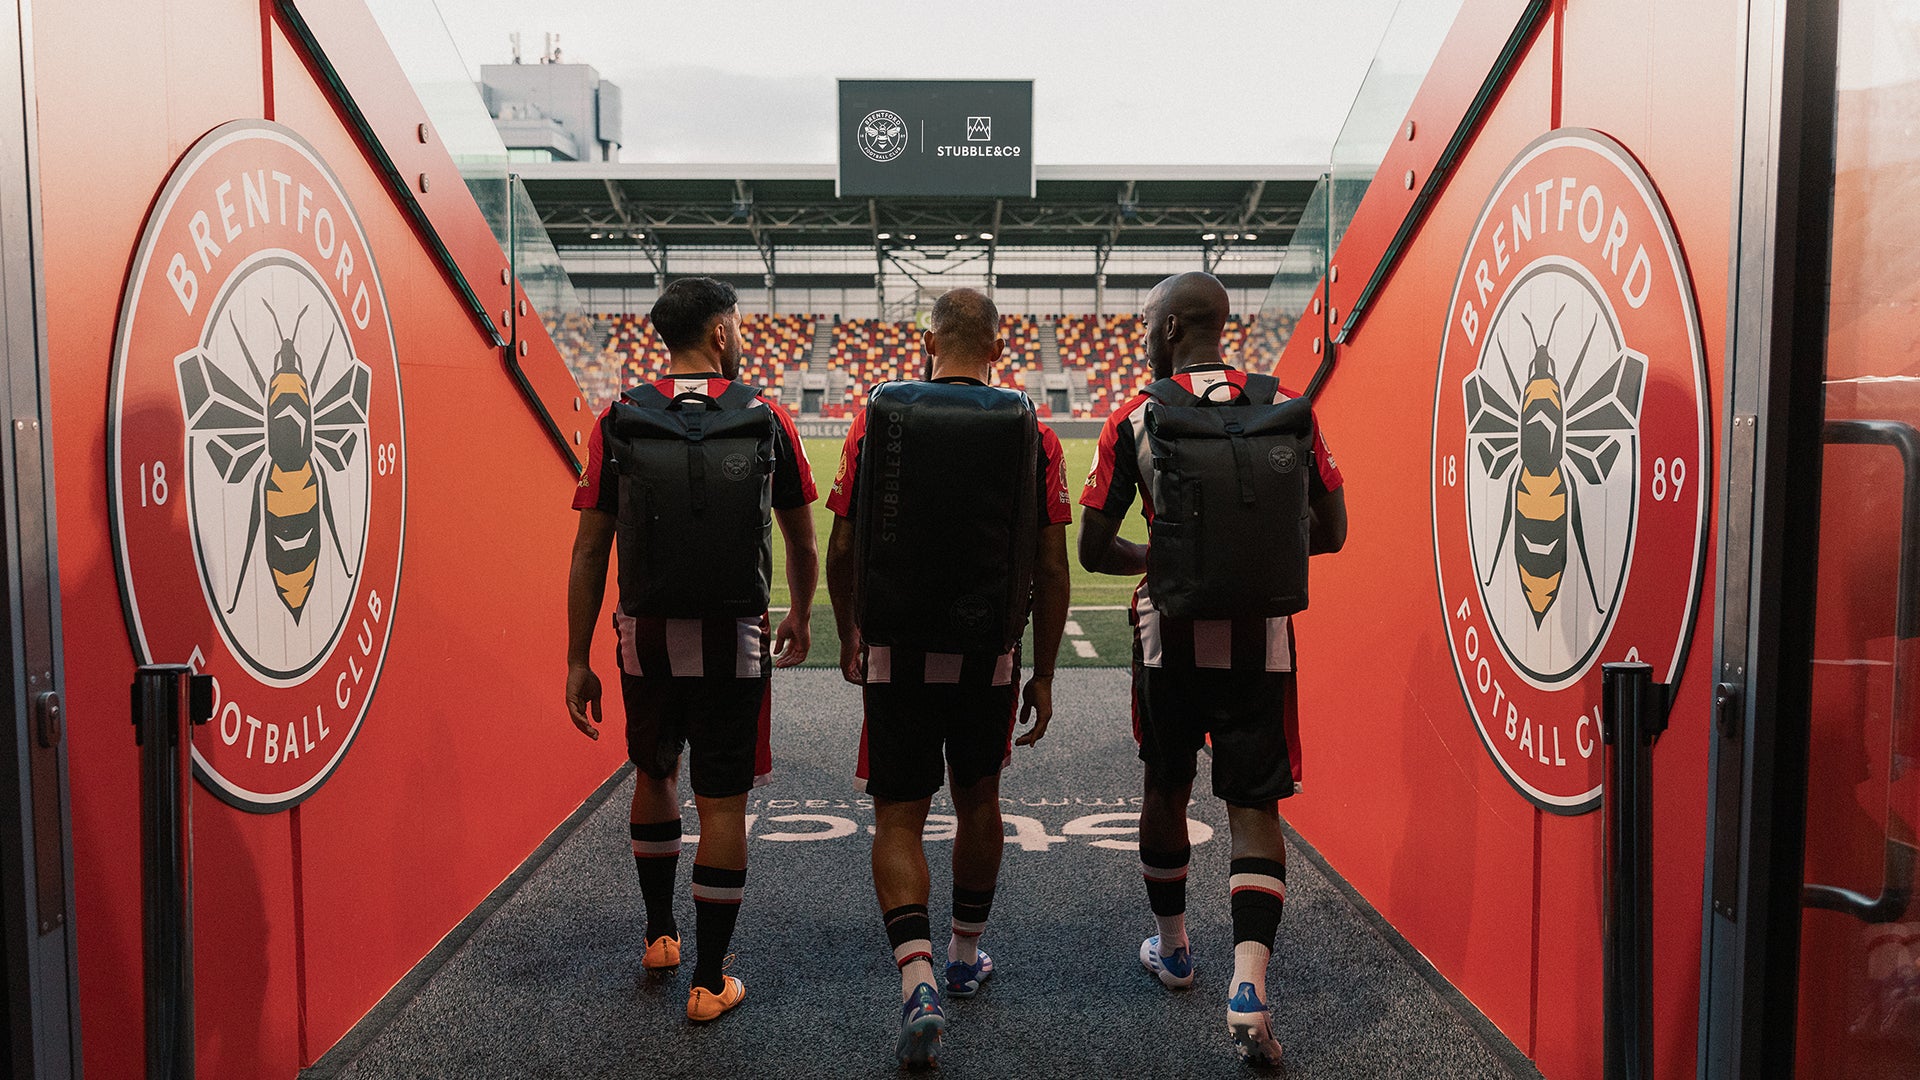 3 football players walking out towards the football pitch wearing black backpacks and rucksacks